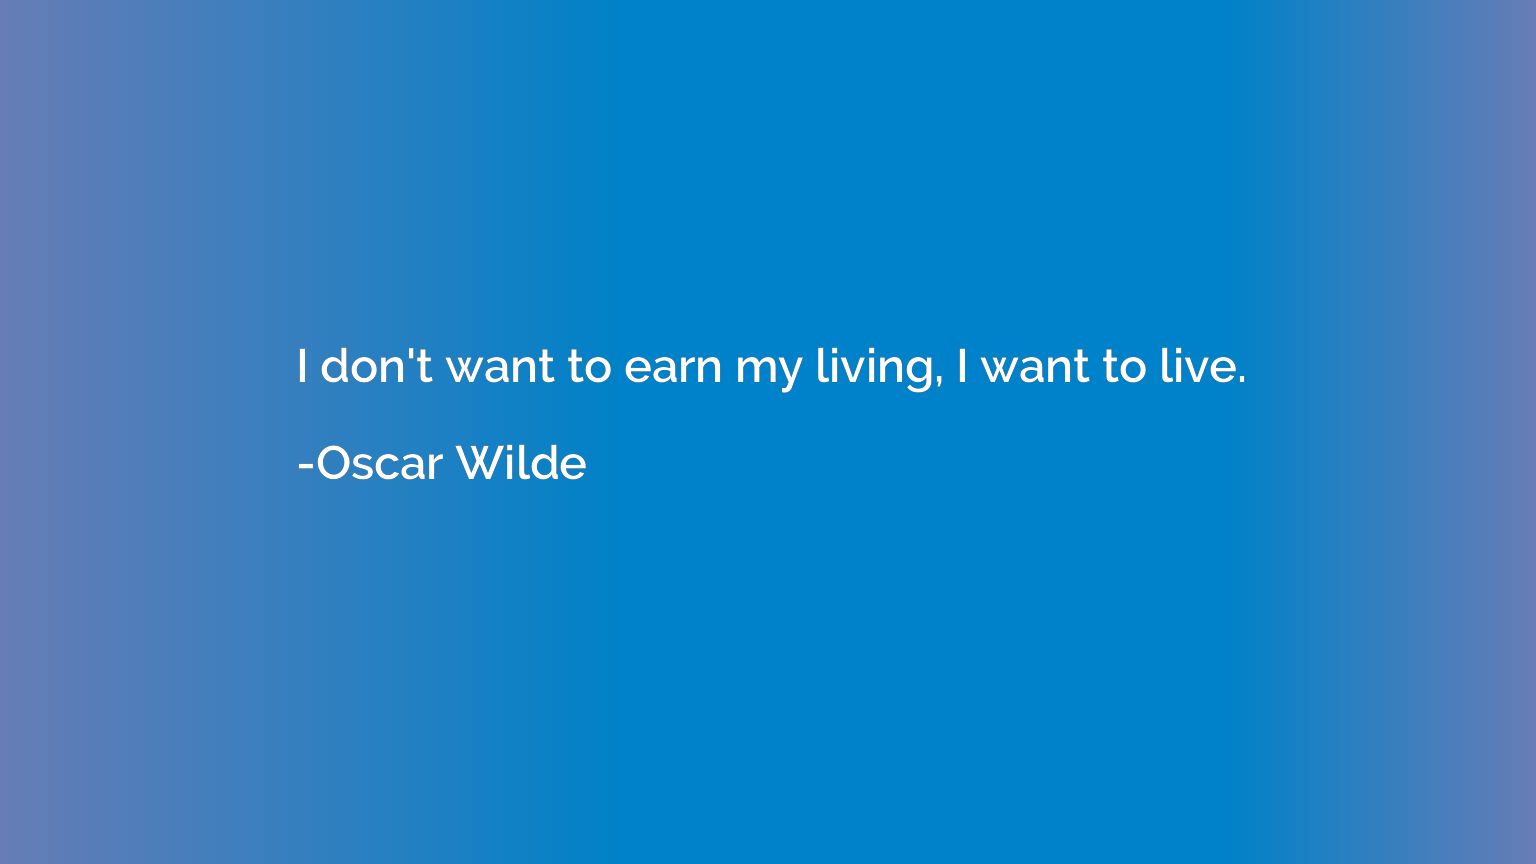 I don't want to earn my living, I want to live.